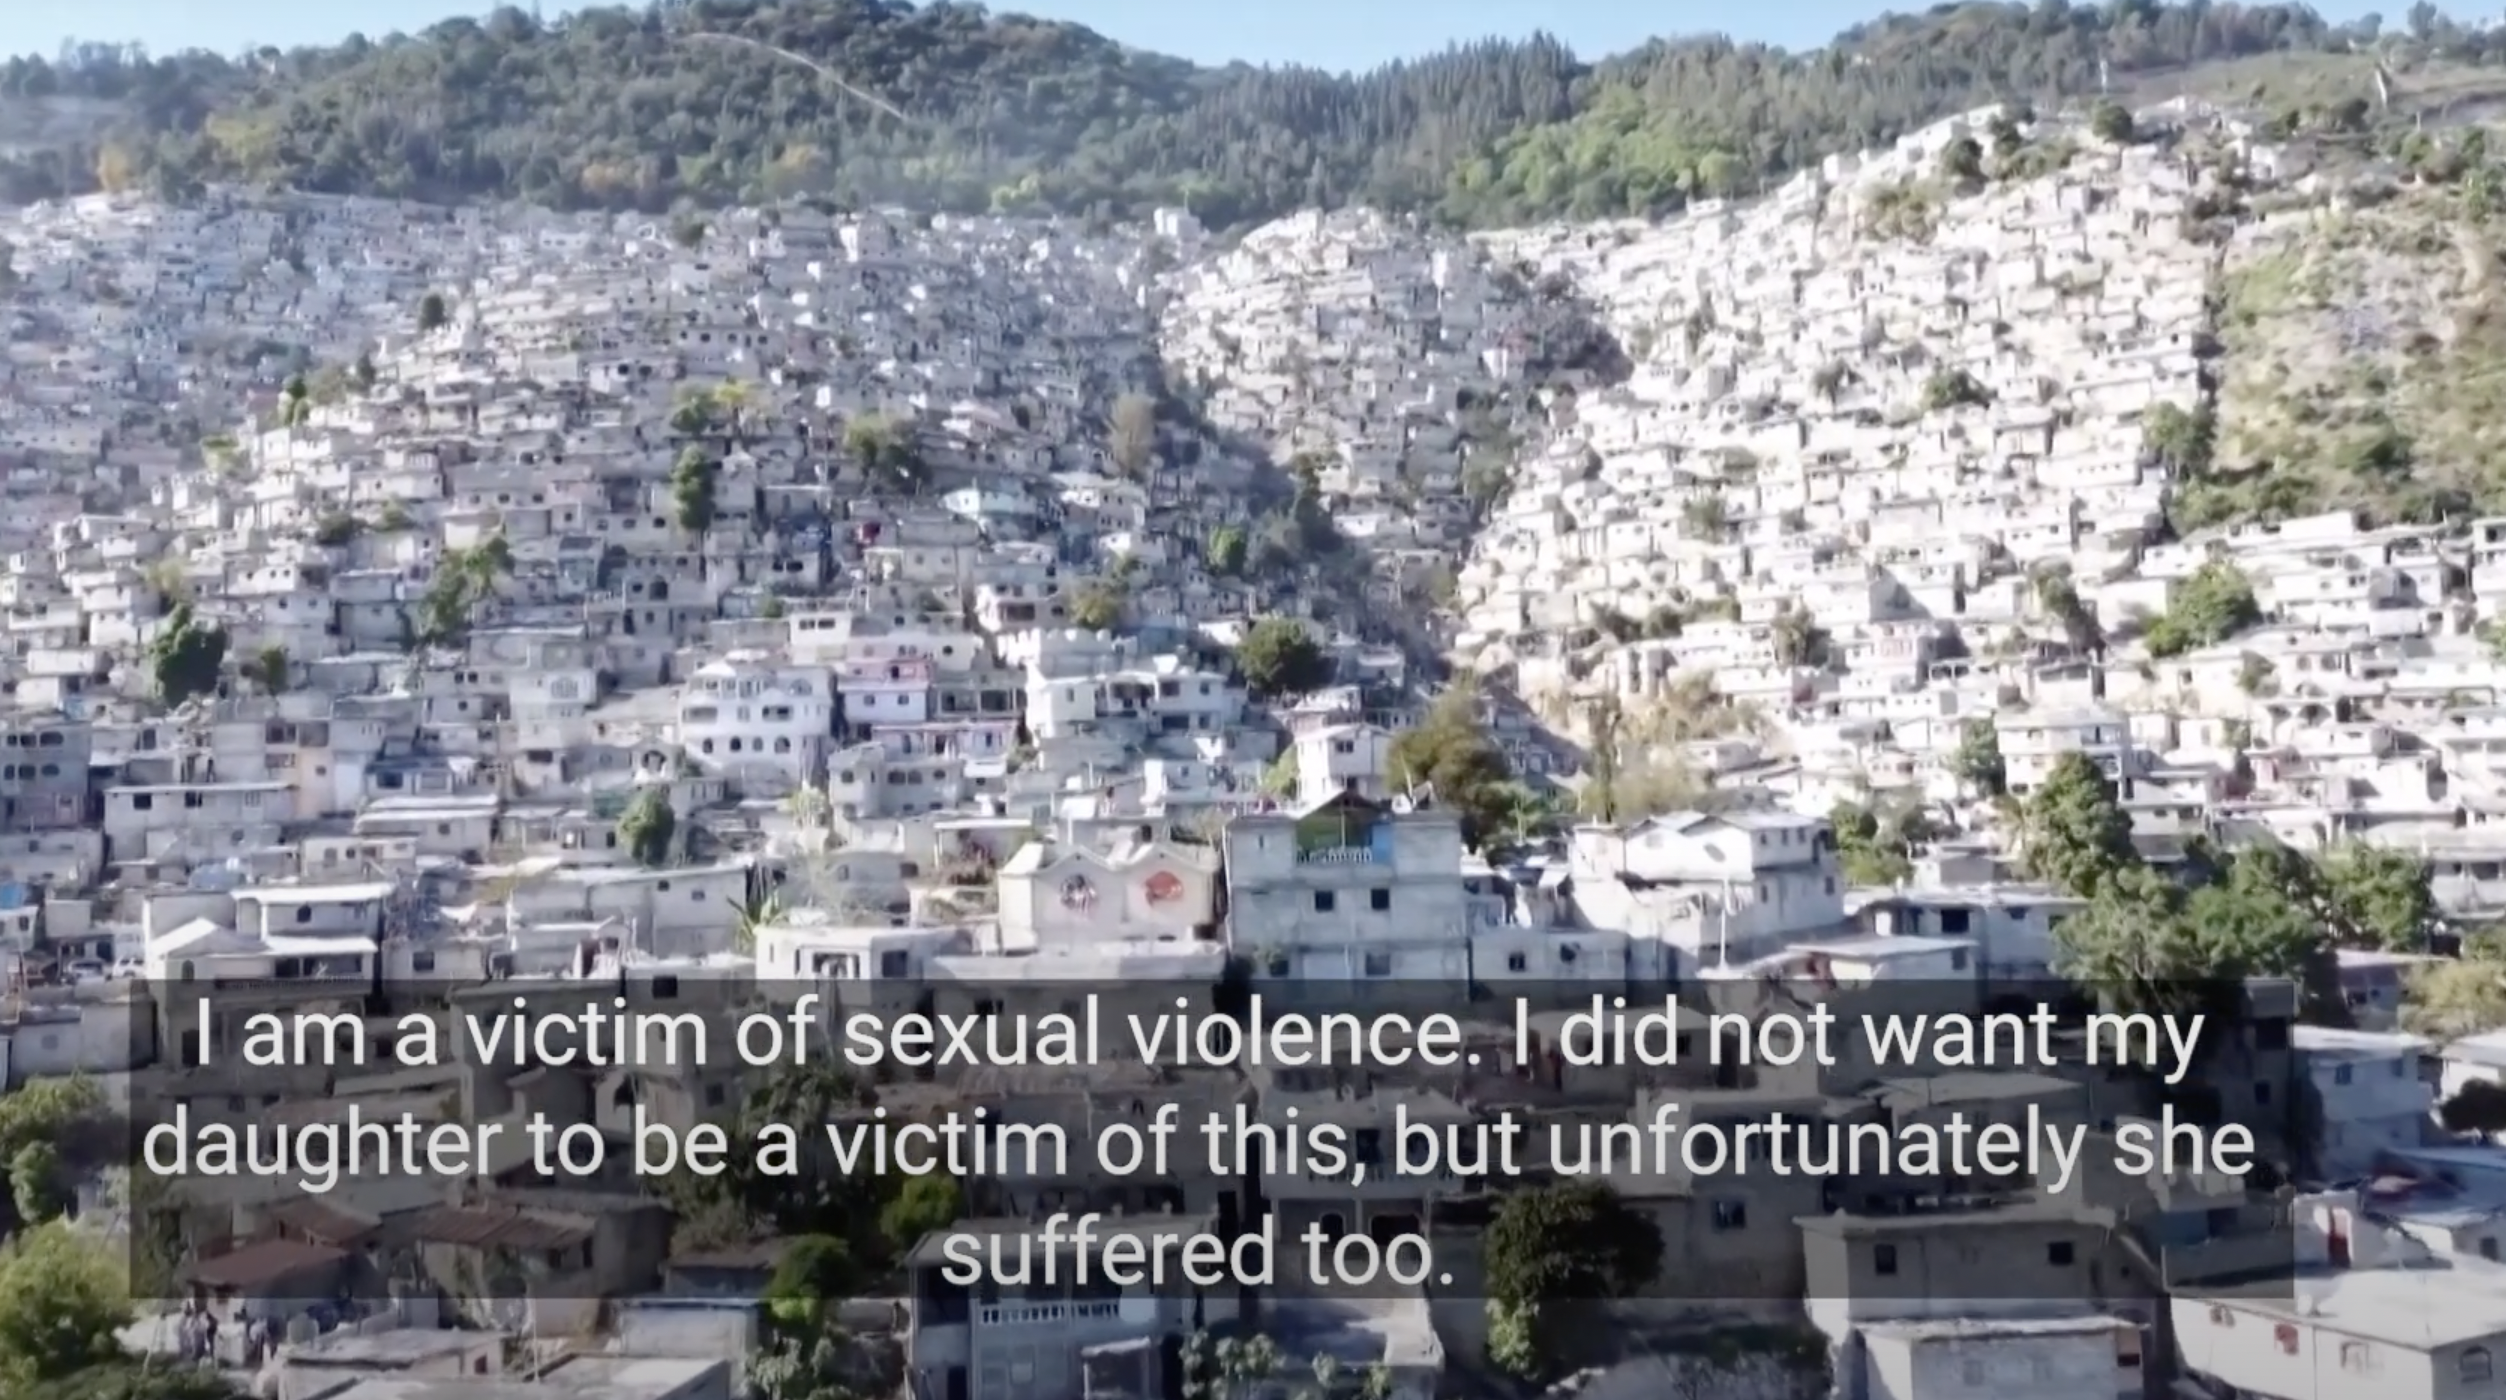 Haitian Gangs Use Rape As Weapon Of Terror - And There Is Little Support For Survivors pic